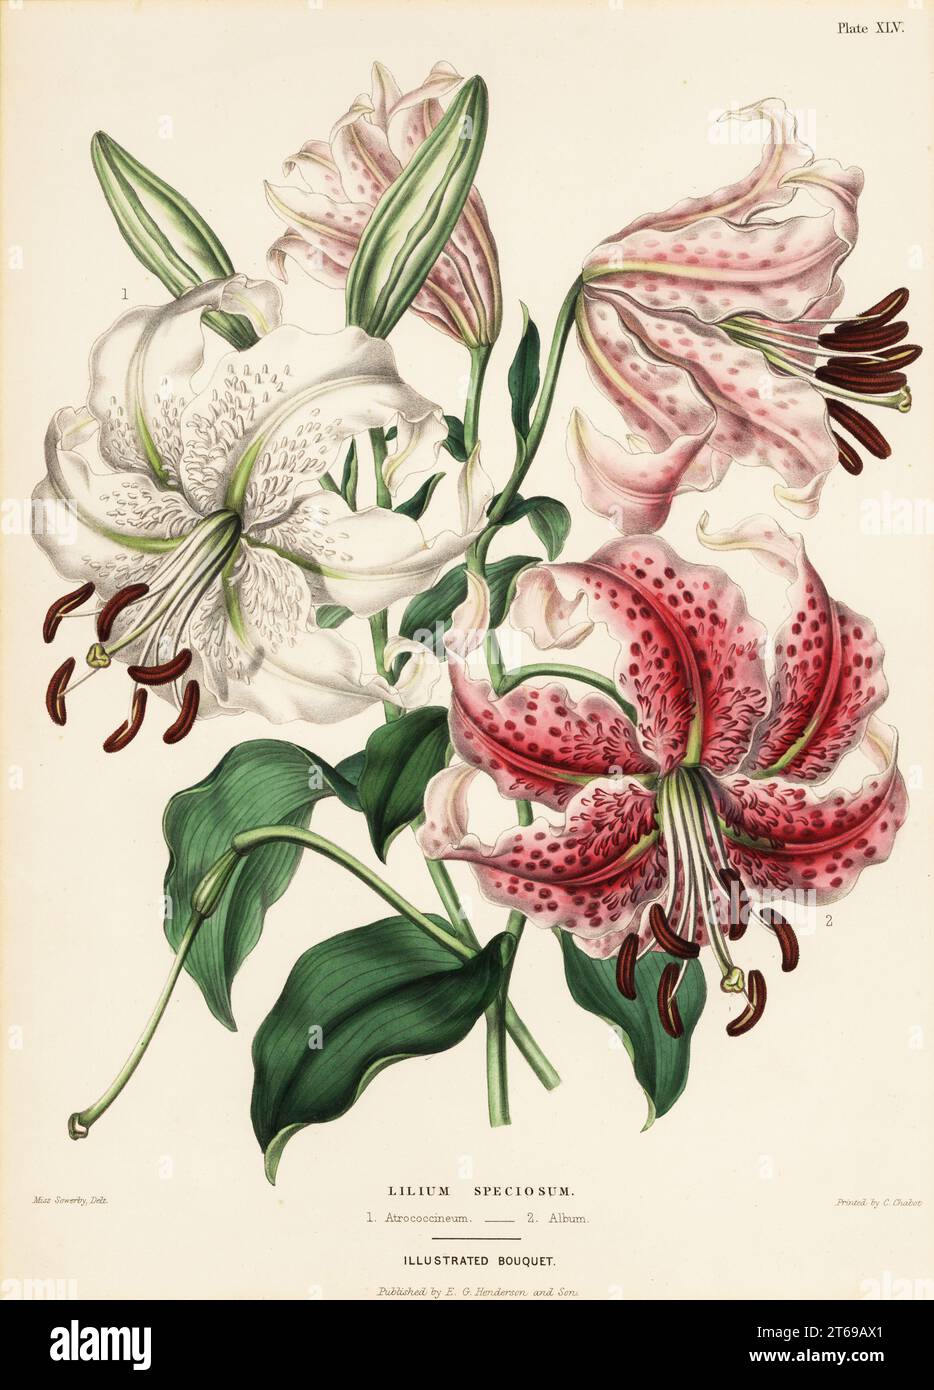 Japanese lily varieties, Lilium specioseum. Pink, Atrococcineum 1 and white, Album 2. Handcoloured copperplate engraving after a botanical illustration by Miss Charlotte Caroline Sowerby from Edward Henderson and Andrew Hendersons The Illustrated Bouquet, consisting of figures with descriptions of new flowers, printed by C. Chabot, E.G. Henderon, London, 1857. Stock Photo